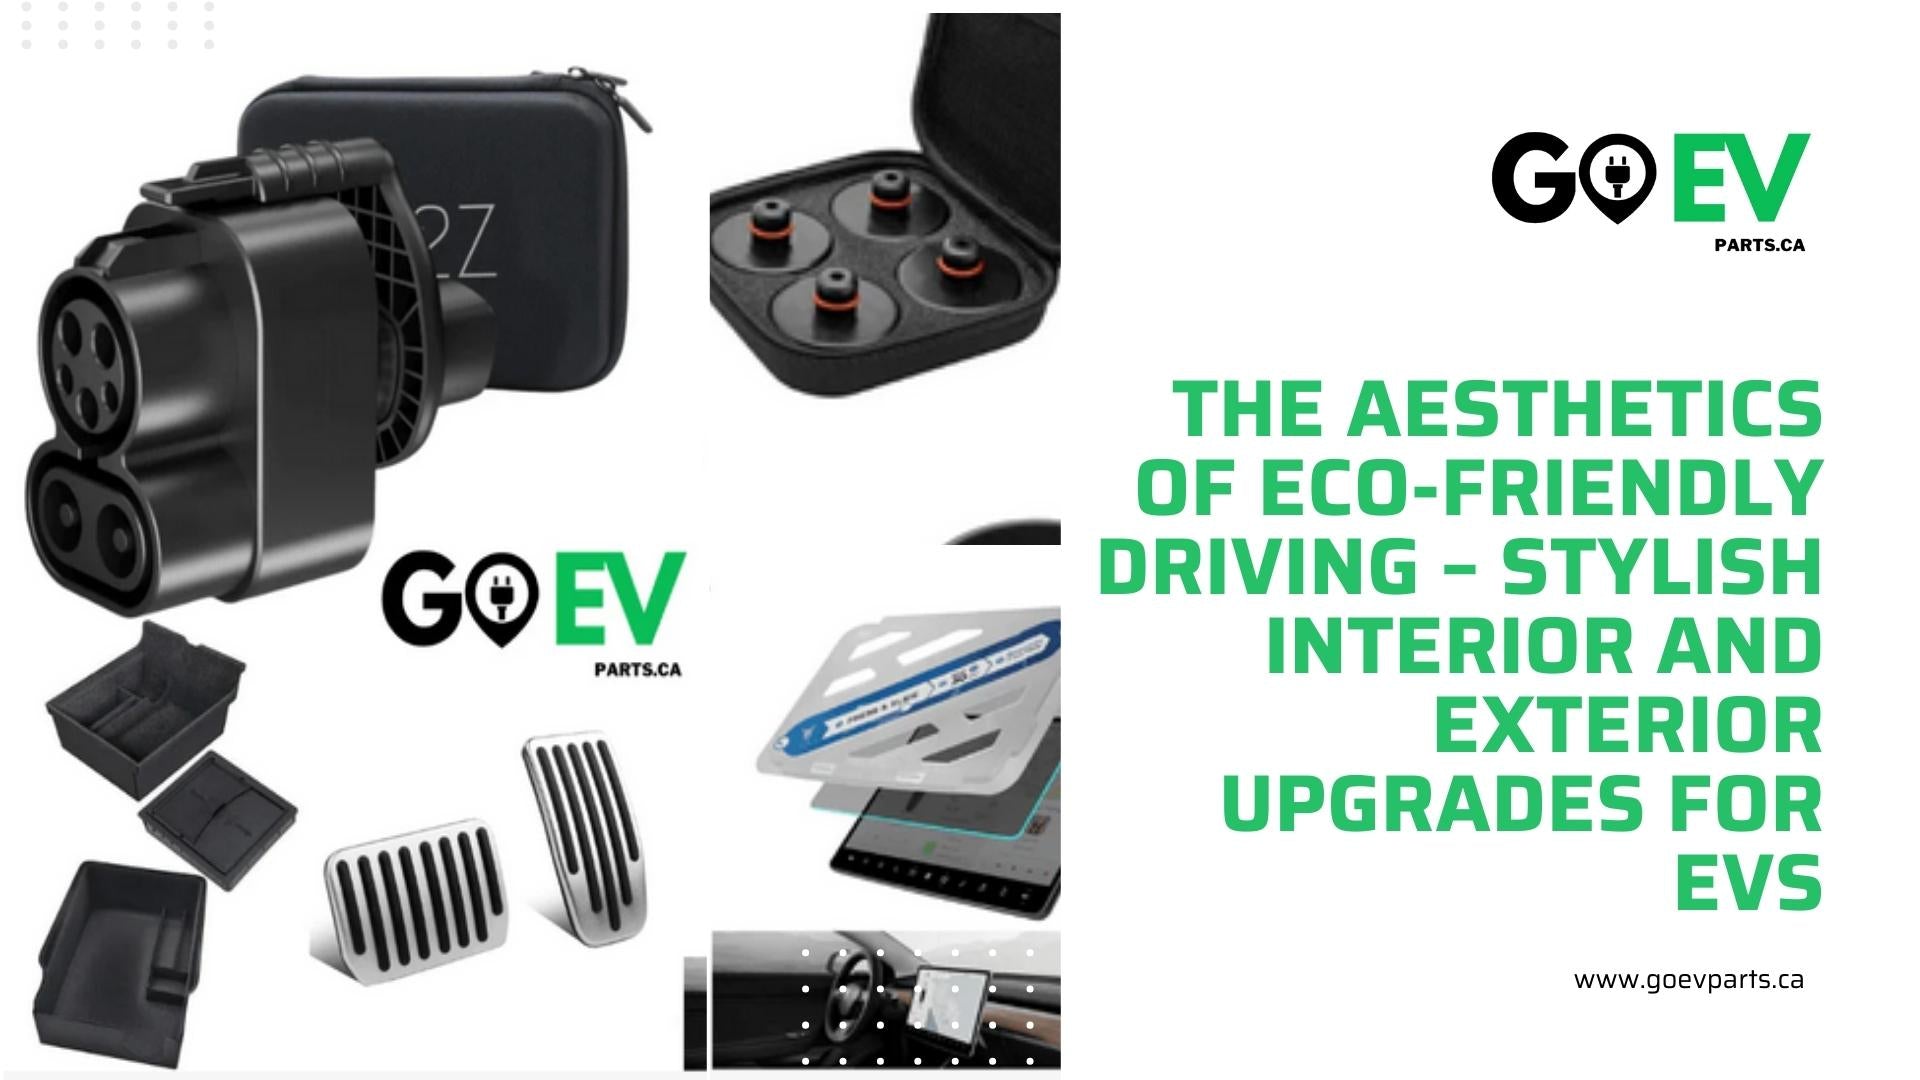 The Aesthetics of Eco-Friendly Driving – Stylish Interior and Exterior Upgrades for EVs